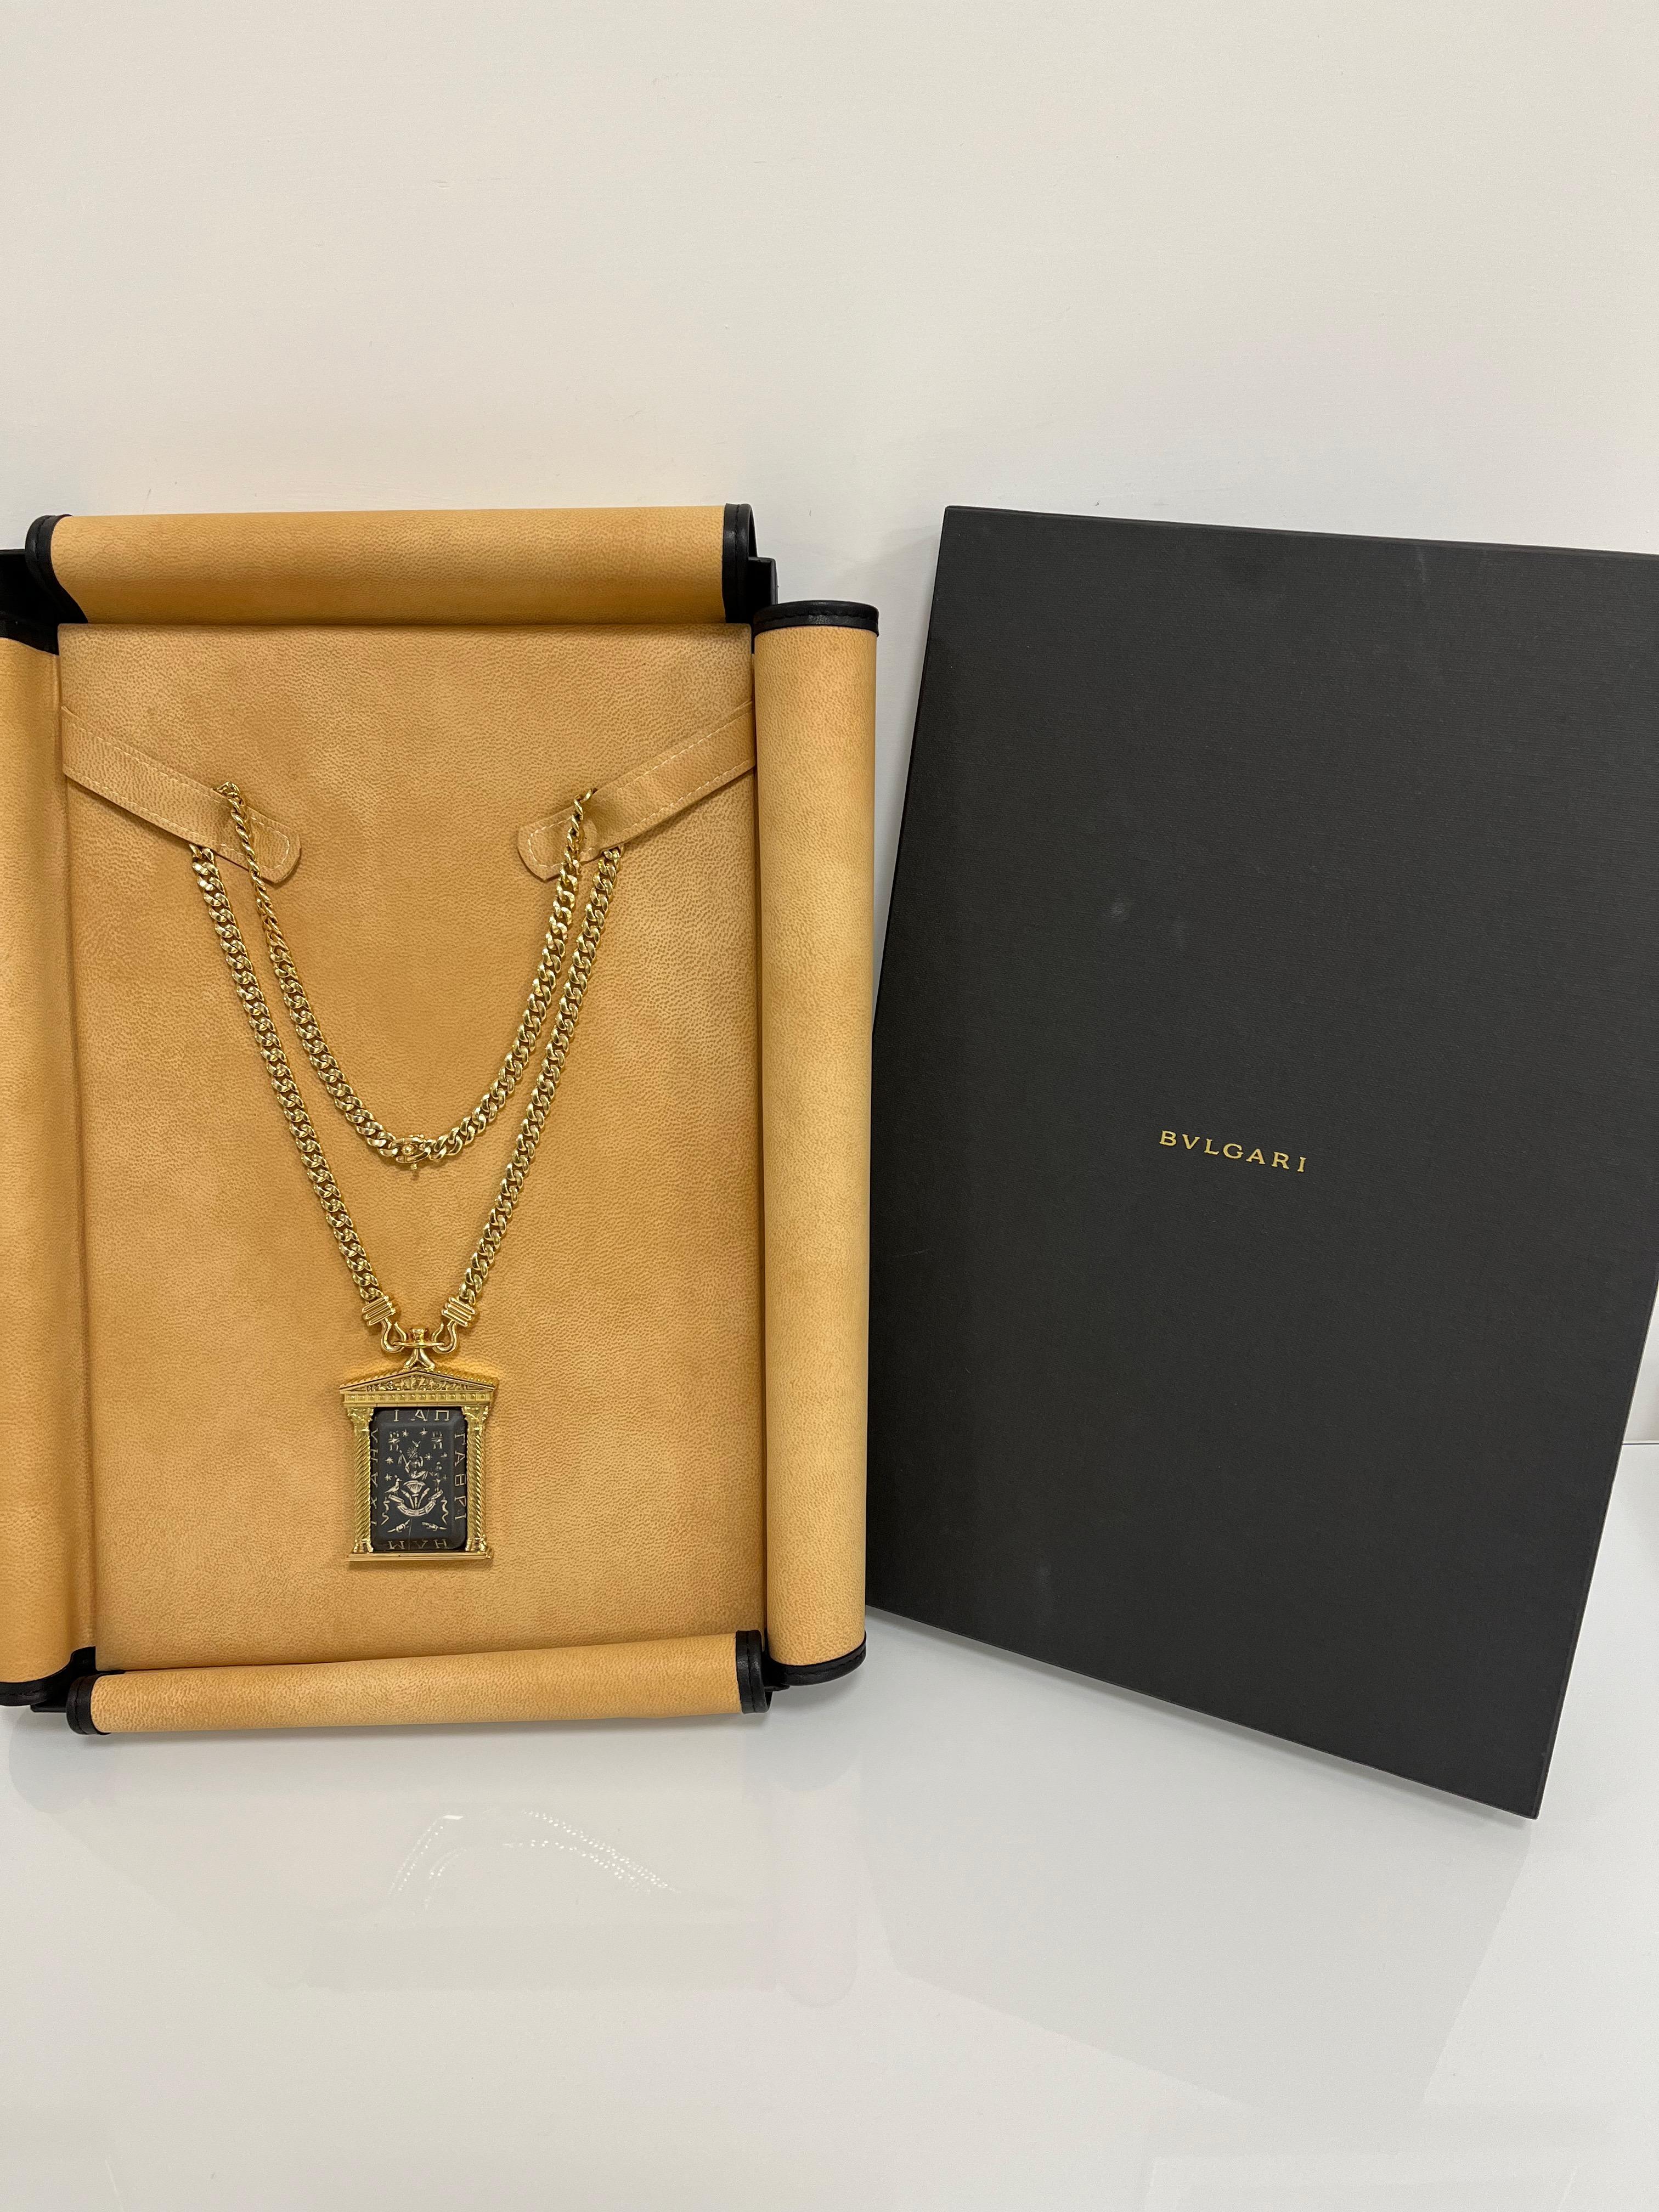 One of a Kind 1970 Bulgari 18 Karat Yellow Gold Necklace with Engraved Pendant 1